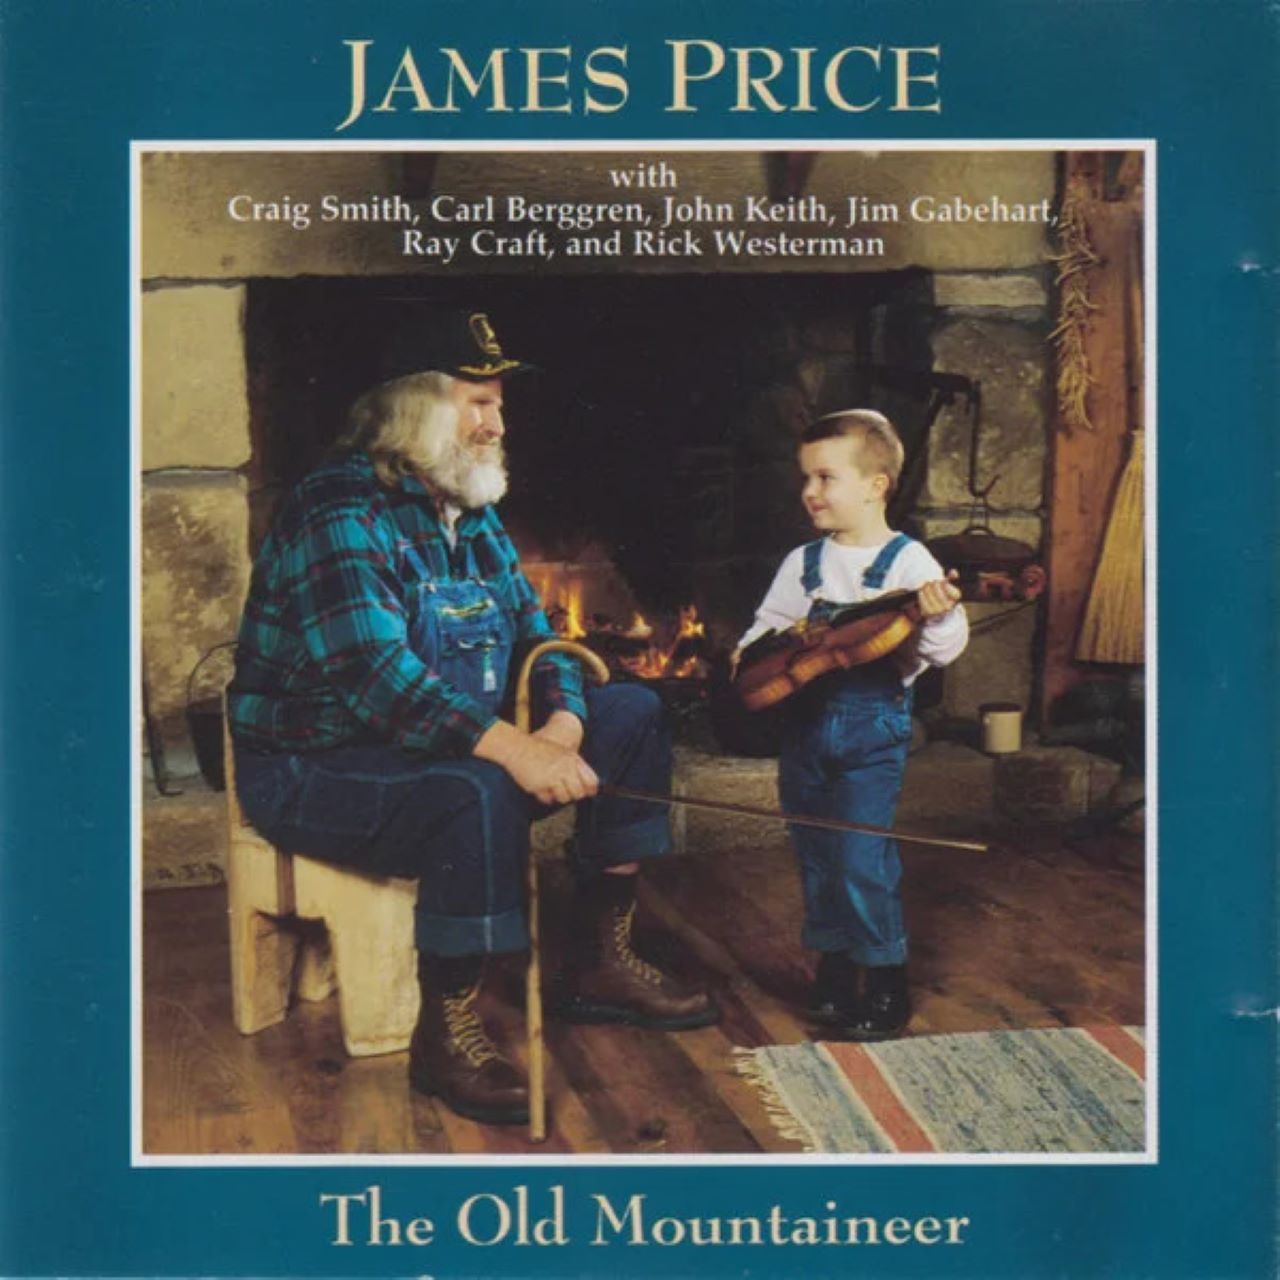 James Price – The Old Mountaineer cover album